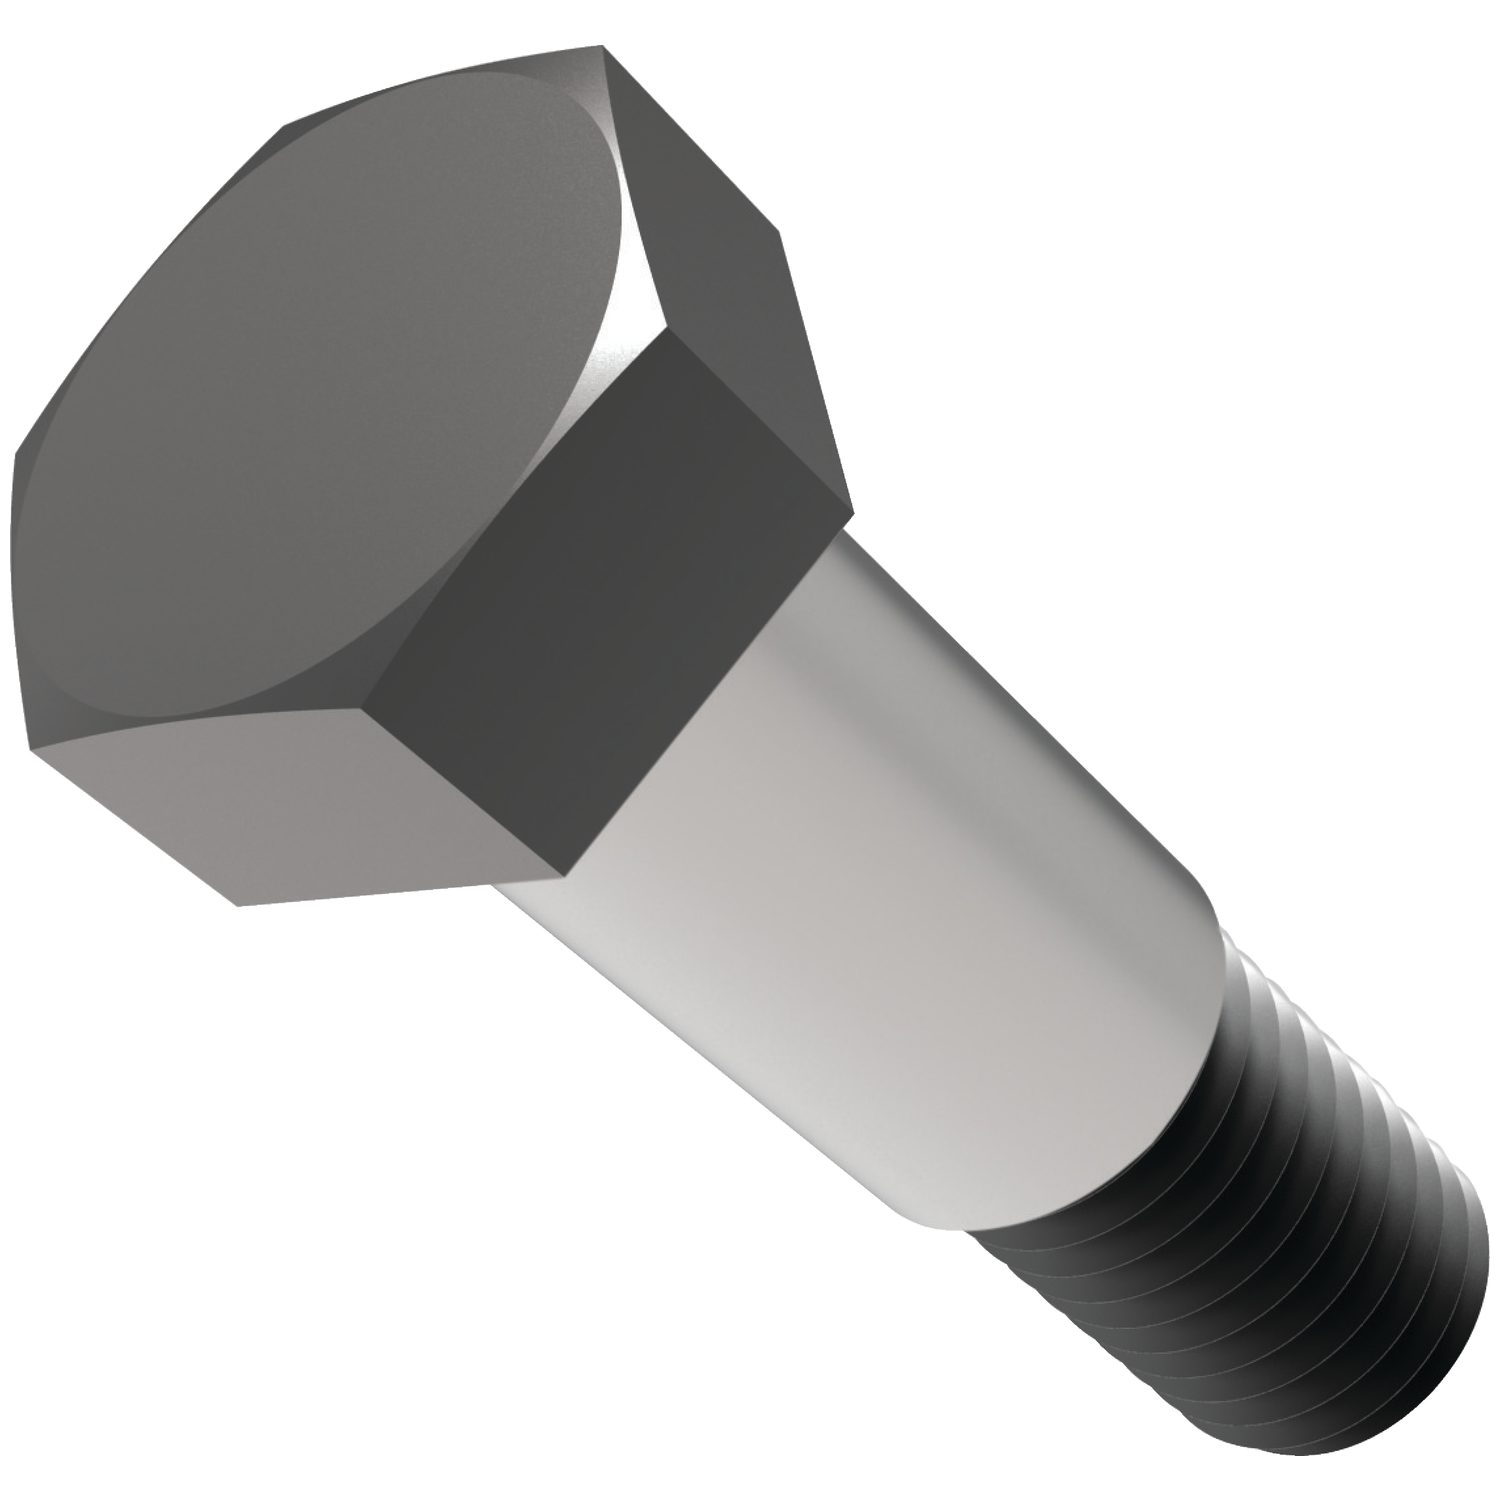 Steel Shoulder Bolts See all steel shoulder bolts here - we manufacture these in construction grade 8.8 steel and high tensile grades 10.9 and 12.9 steel. Protective finishes and special sizes can be manufactured on request.